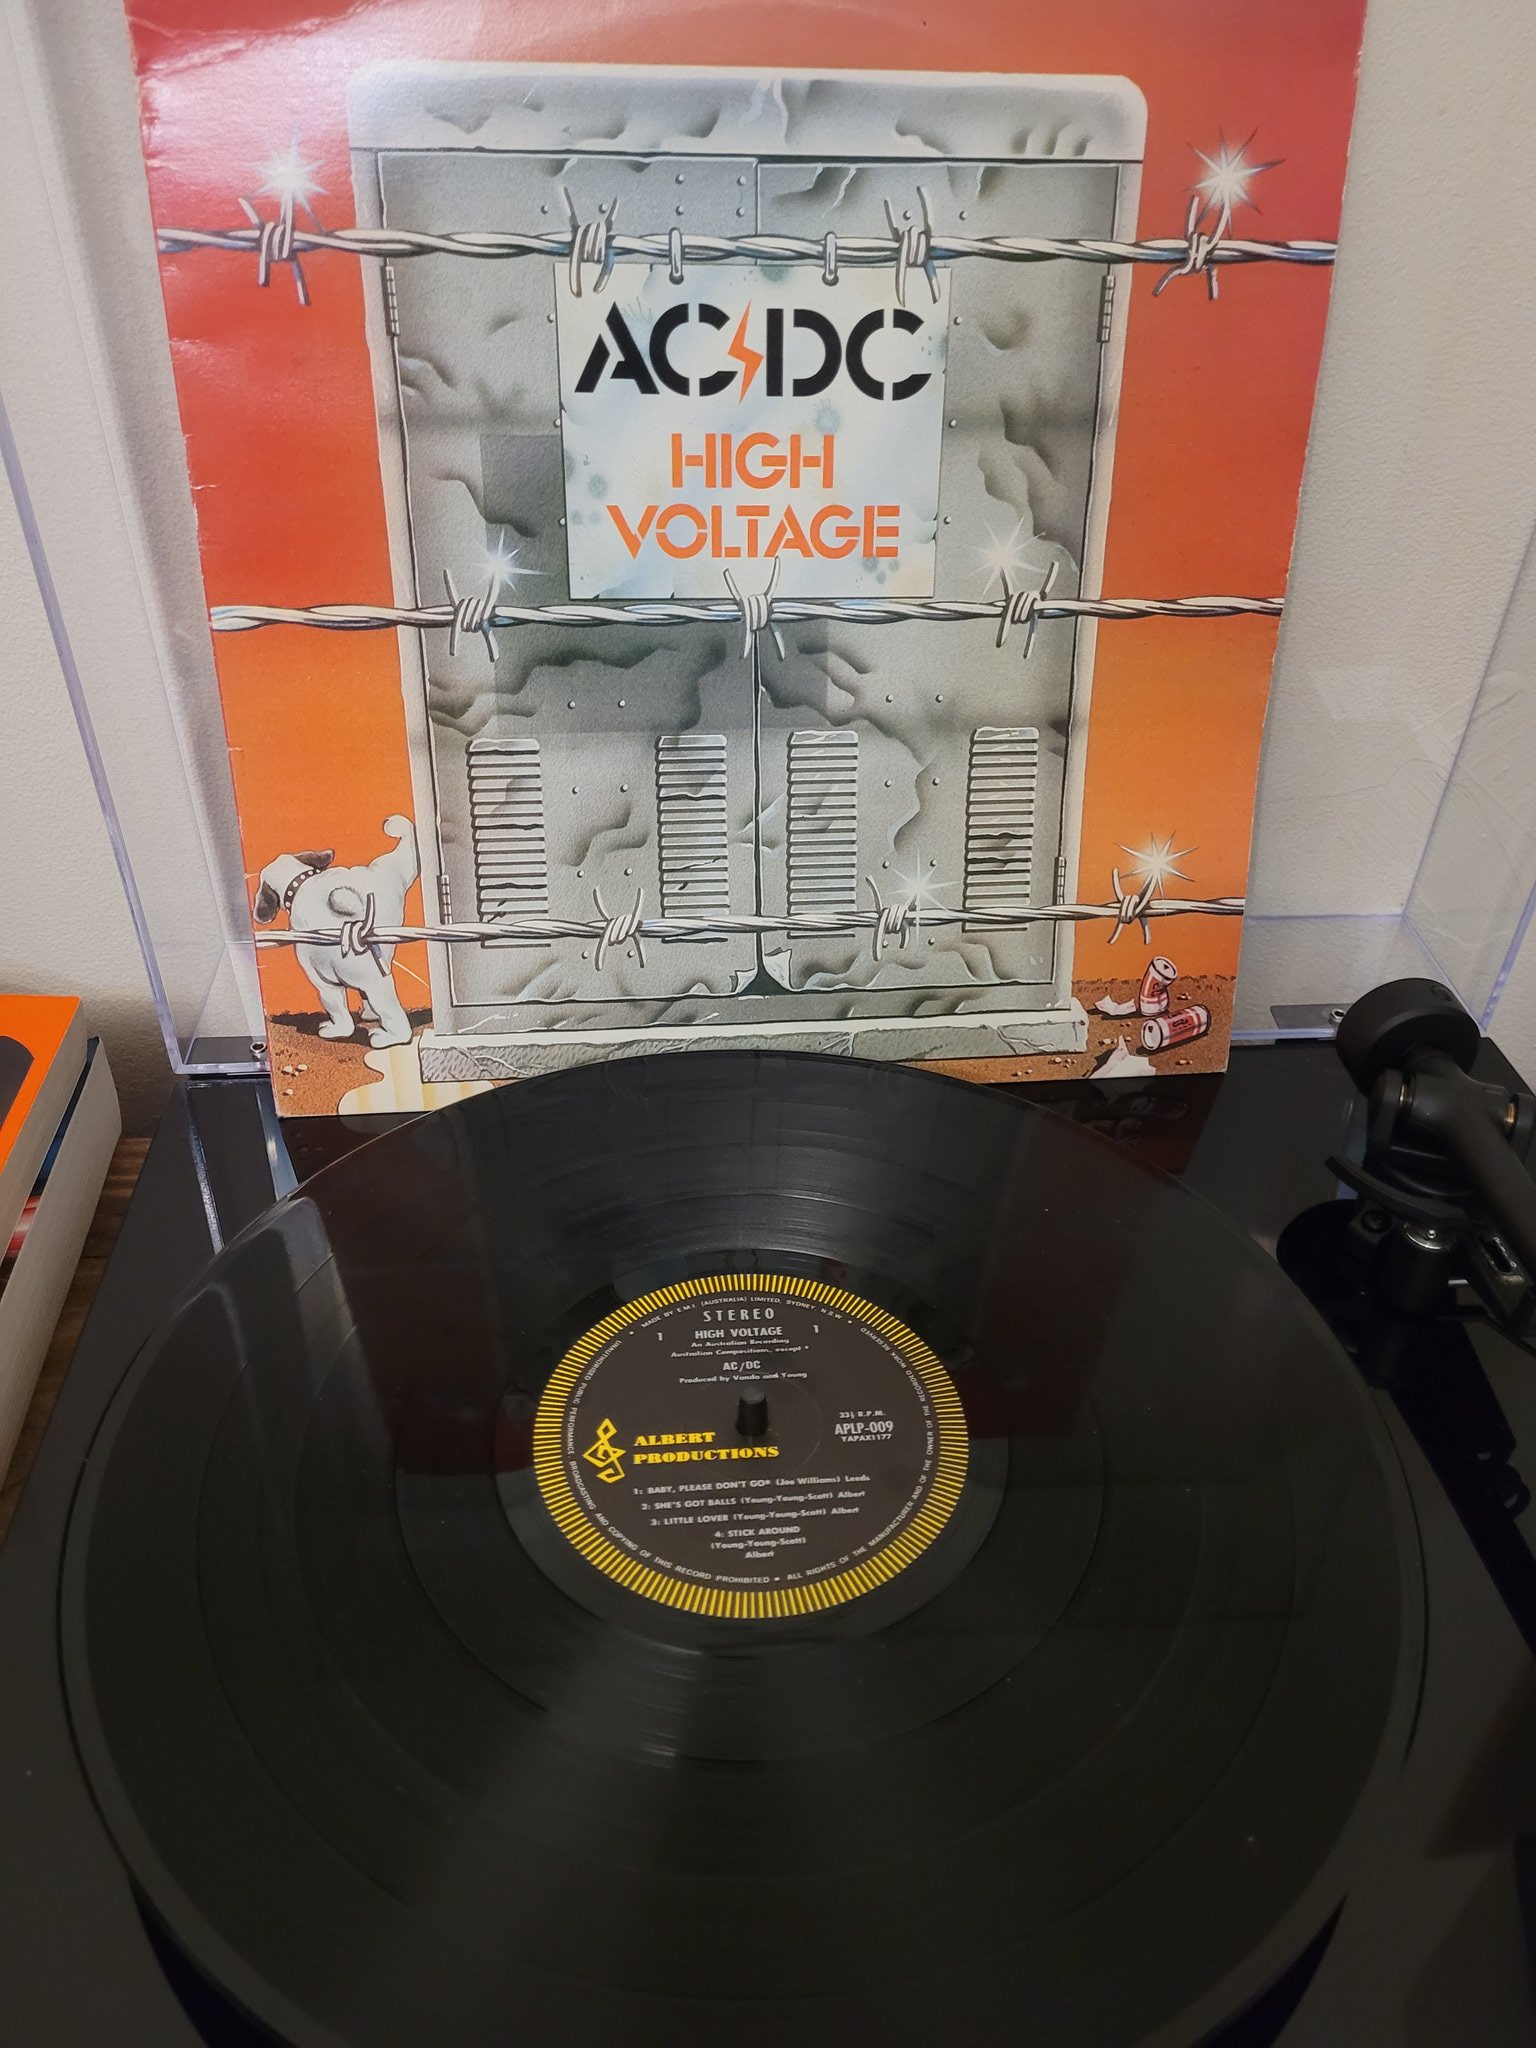 Rummelig Falde tilbage leder AC/DC on Twitter: "OTD 1975: AC/DC's first album “High Voltage” is released  in Australia by Albert Productions/EMI. On the 19th they play a special  performance at the Hard Rock Café in Melbourne